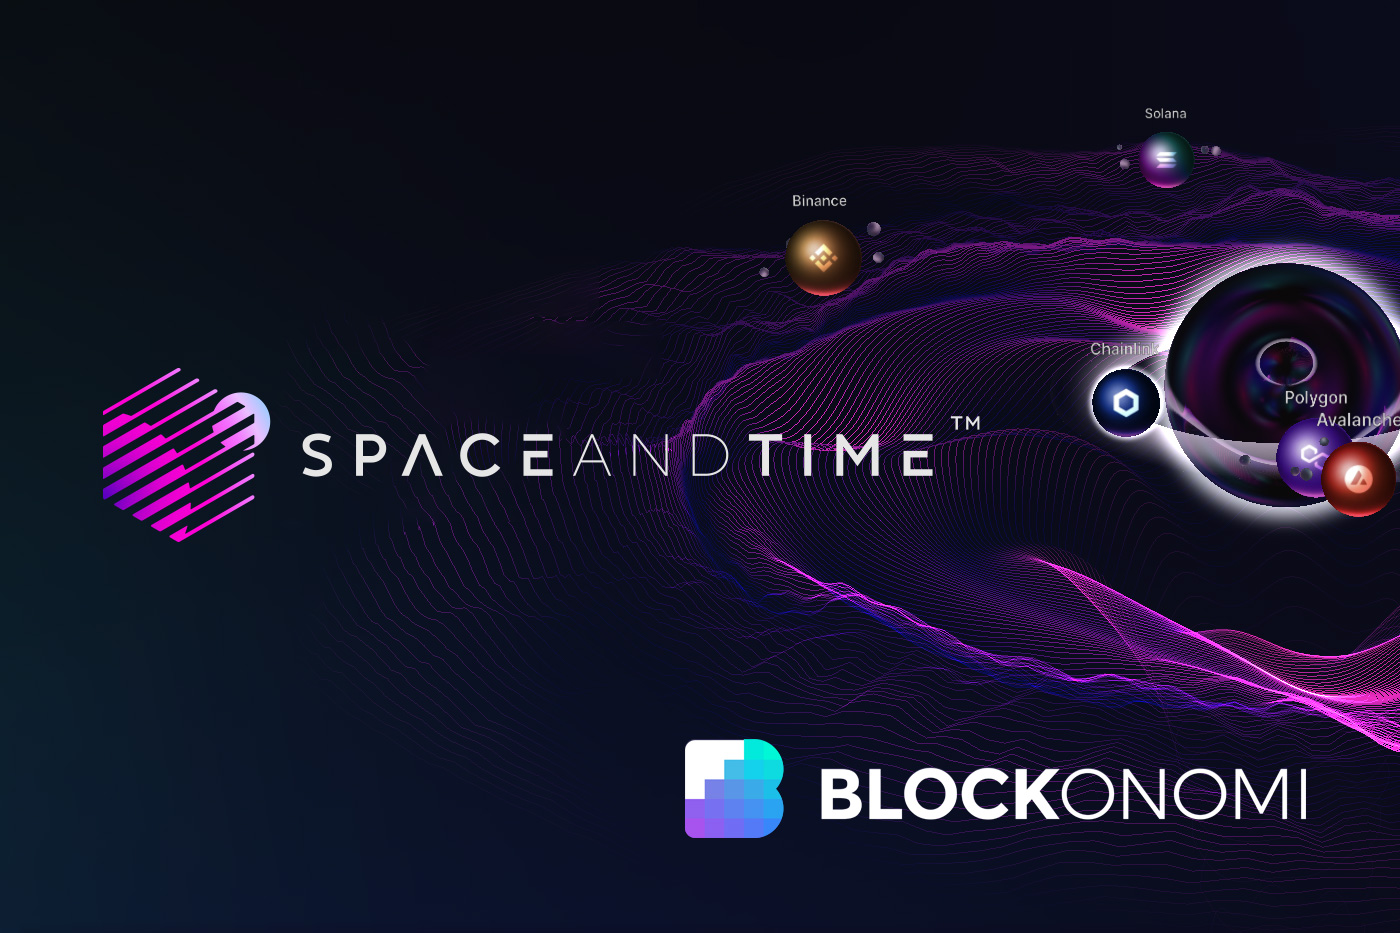 Space and Time Funding Rounds, Token Sale Review & Tokenomics Analysis | bitcoinhelp.fun